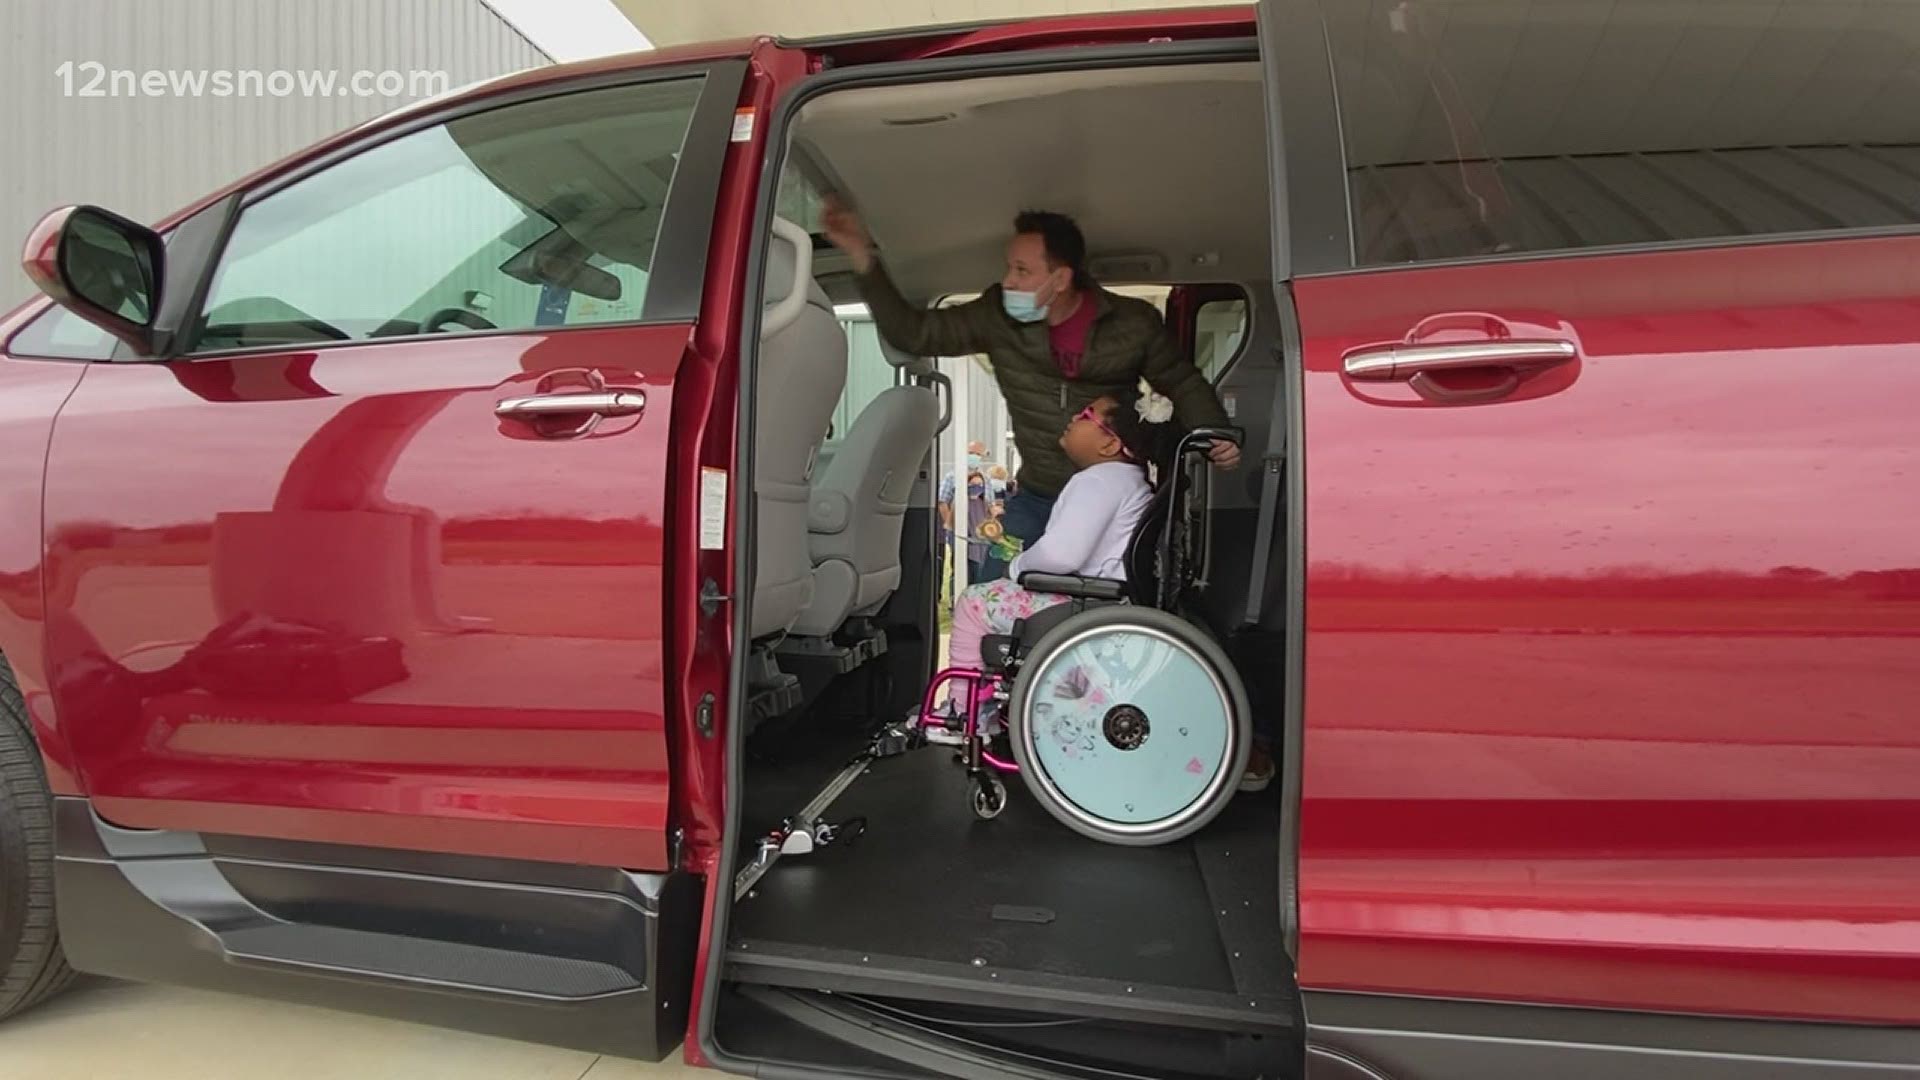 Melissa Johnson and her daughter Grace were in need of a wheelchair-accessible van, and the community delivered.